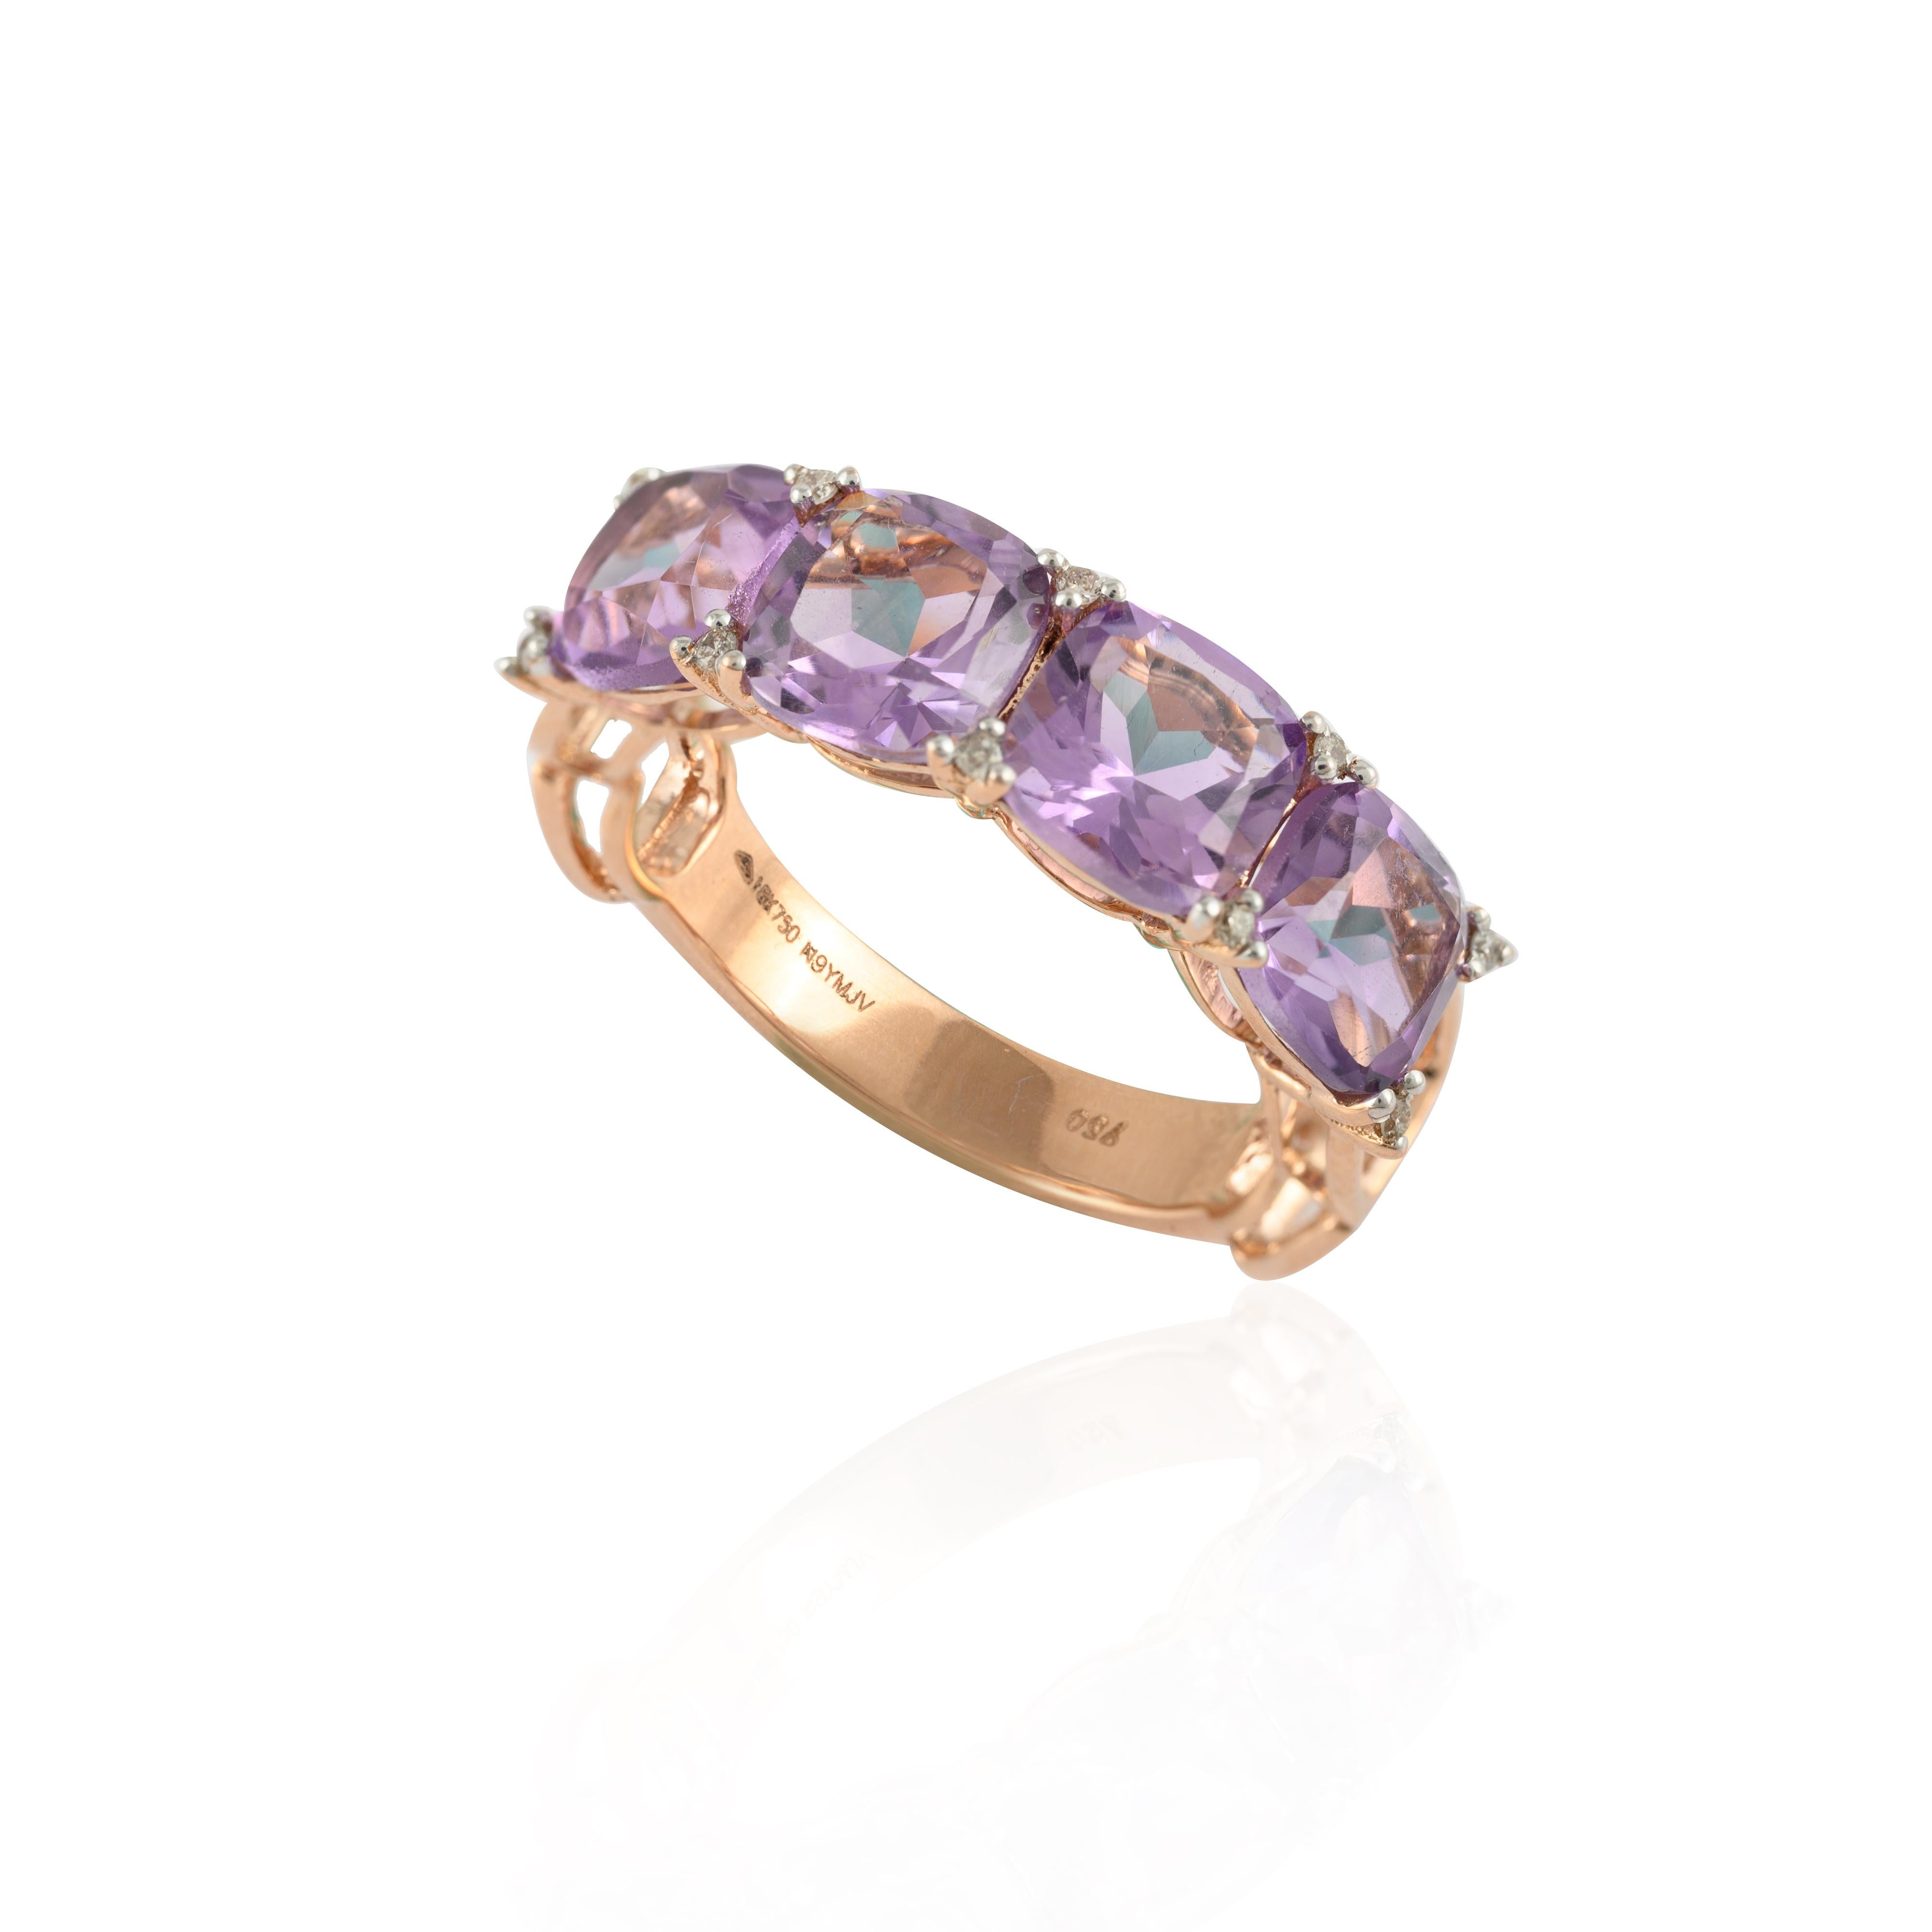 For Sale:  2.92 Carat Cushion Amethyst & Diamond Half Band Ring in 18k Solid Rose Gold 9